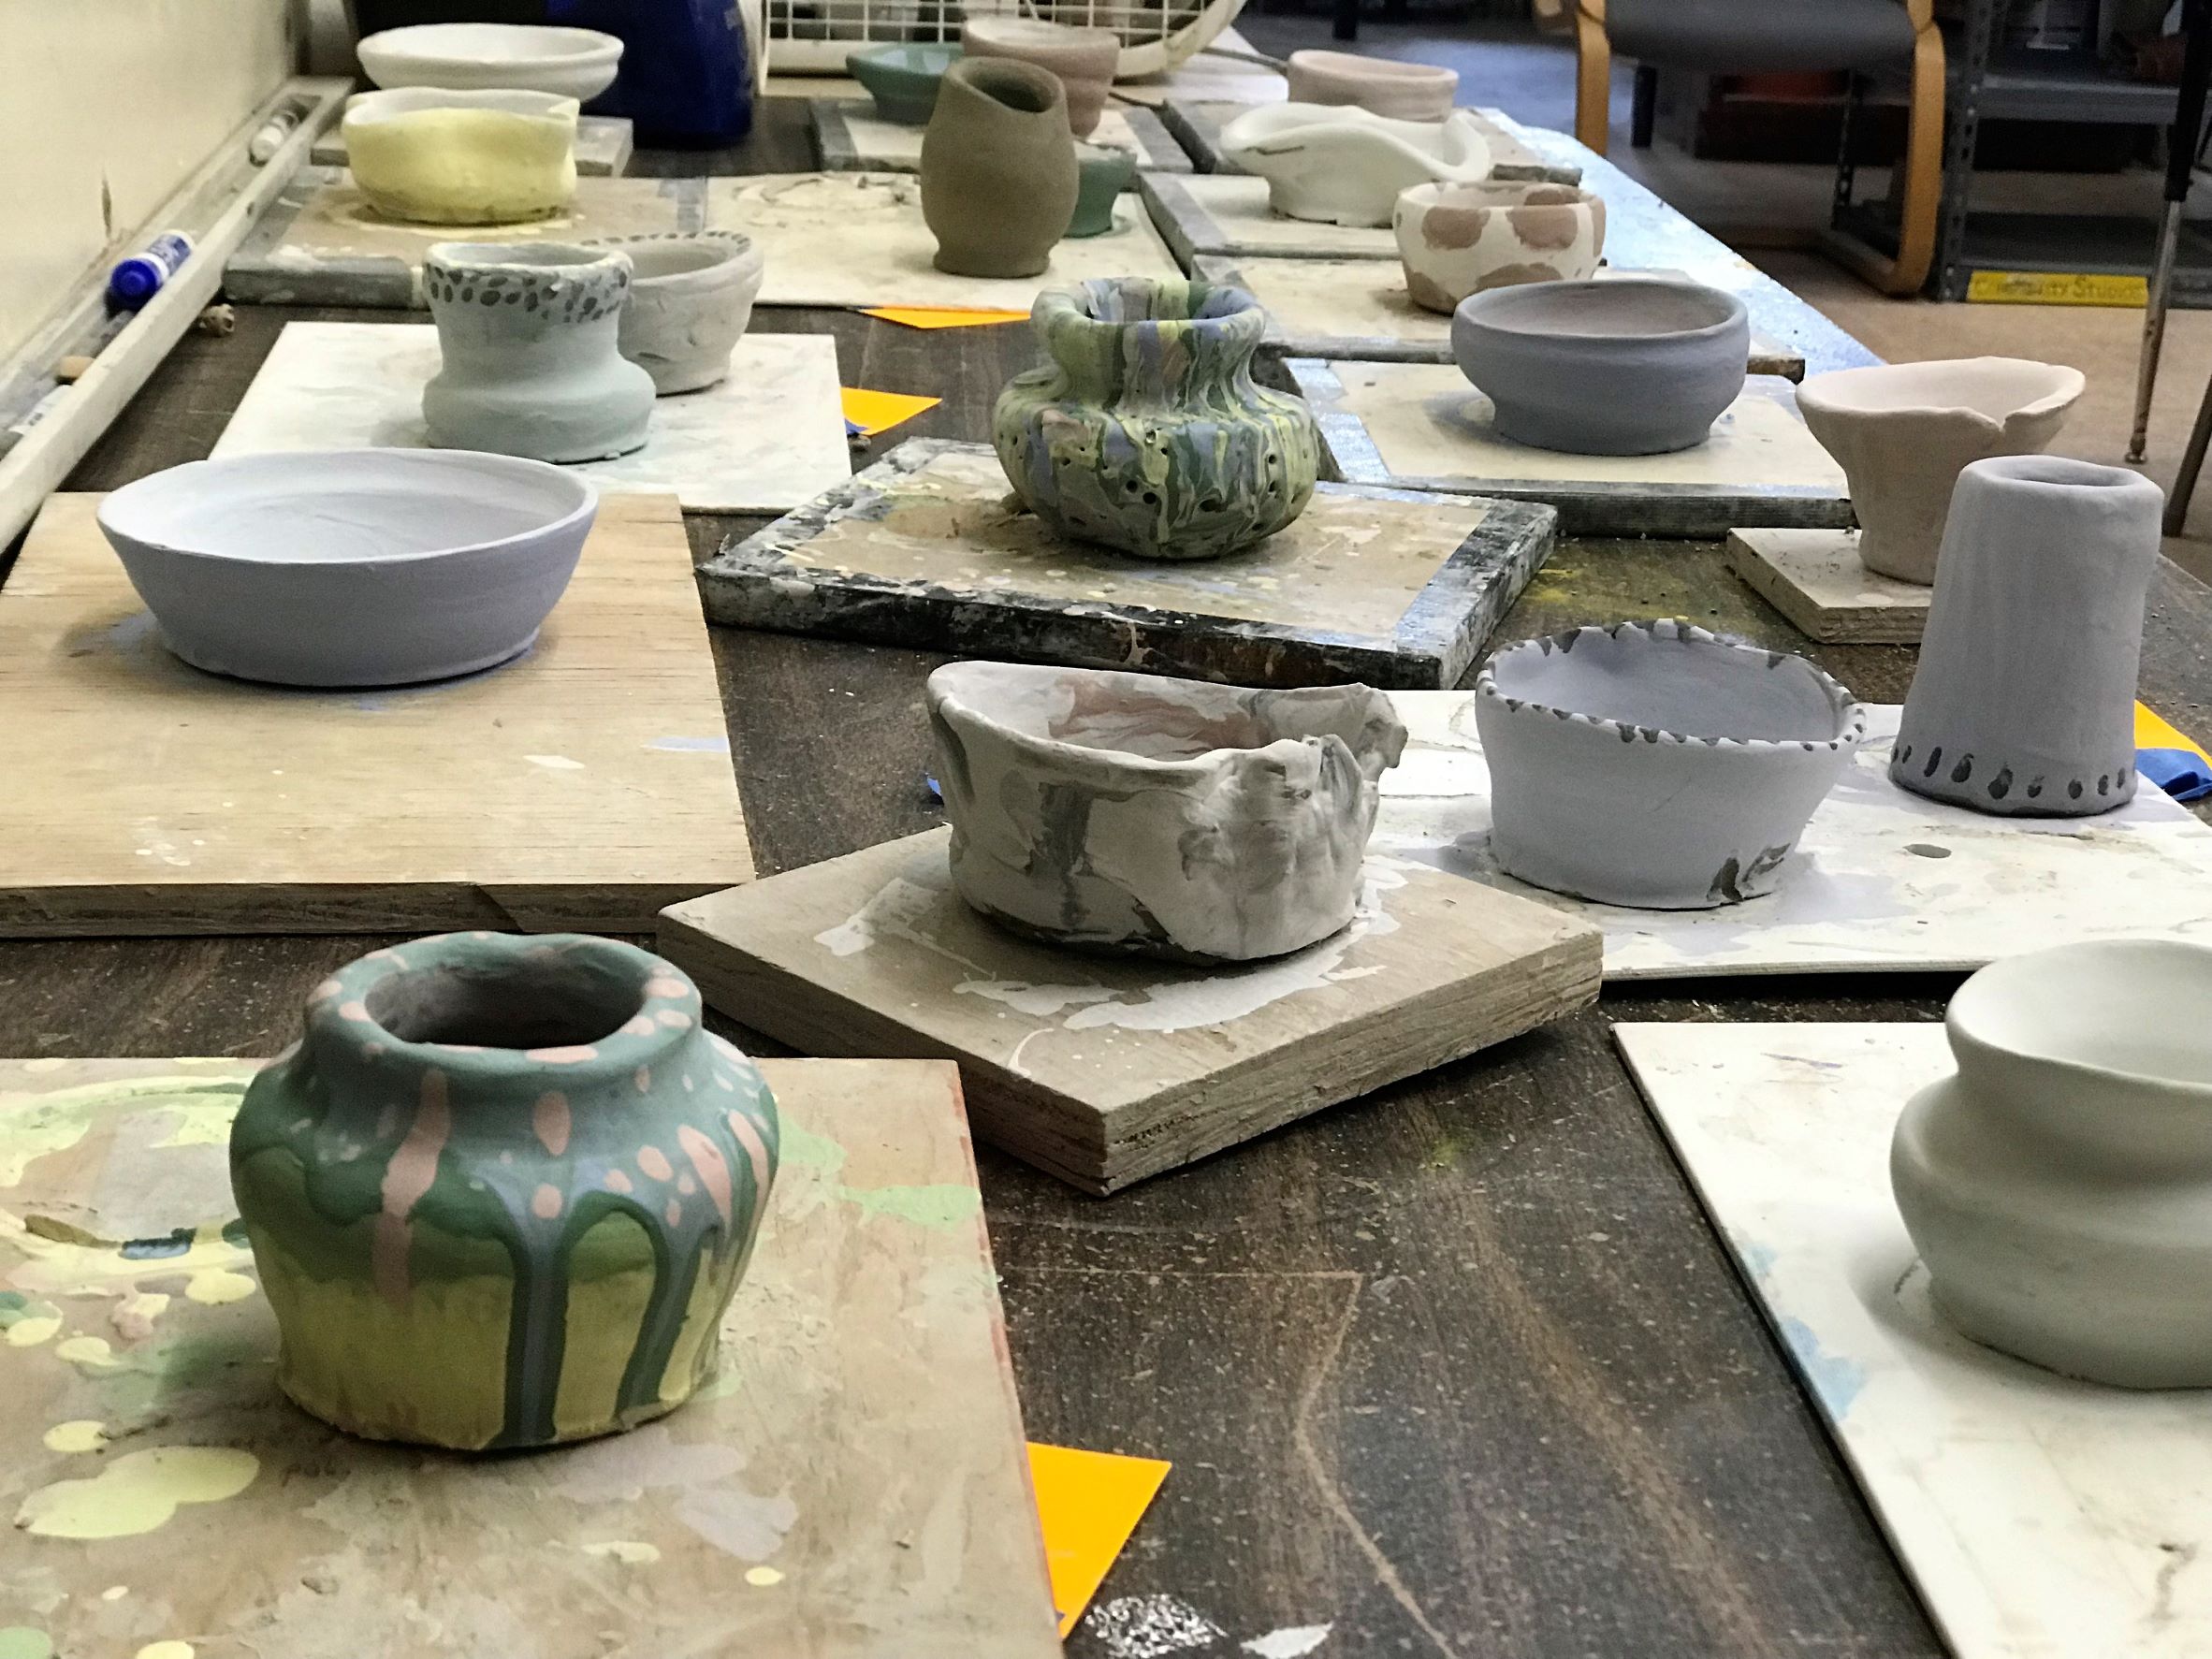 An image of pottery in various stages of completion.